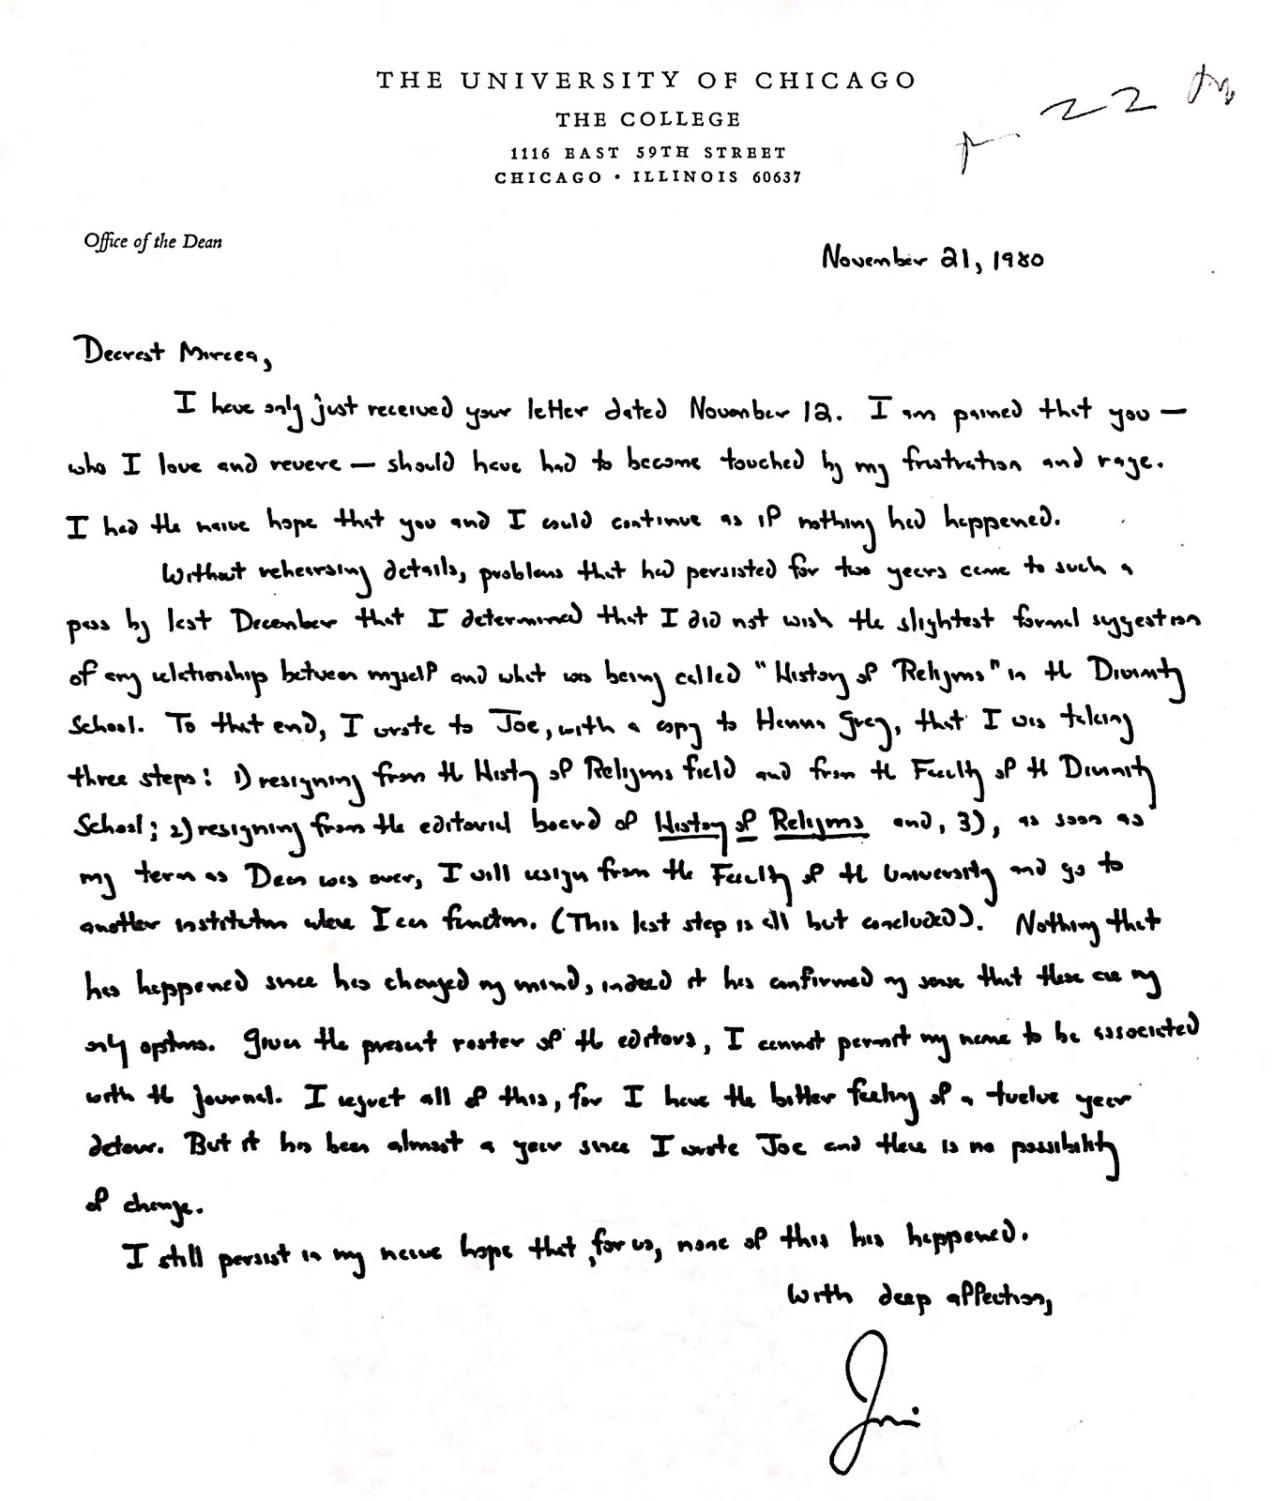 A November 21, 1980 letter from Smith to Eliade.